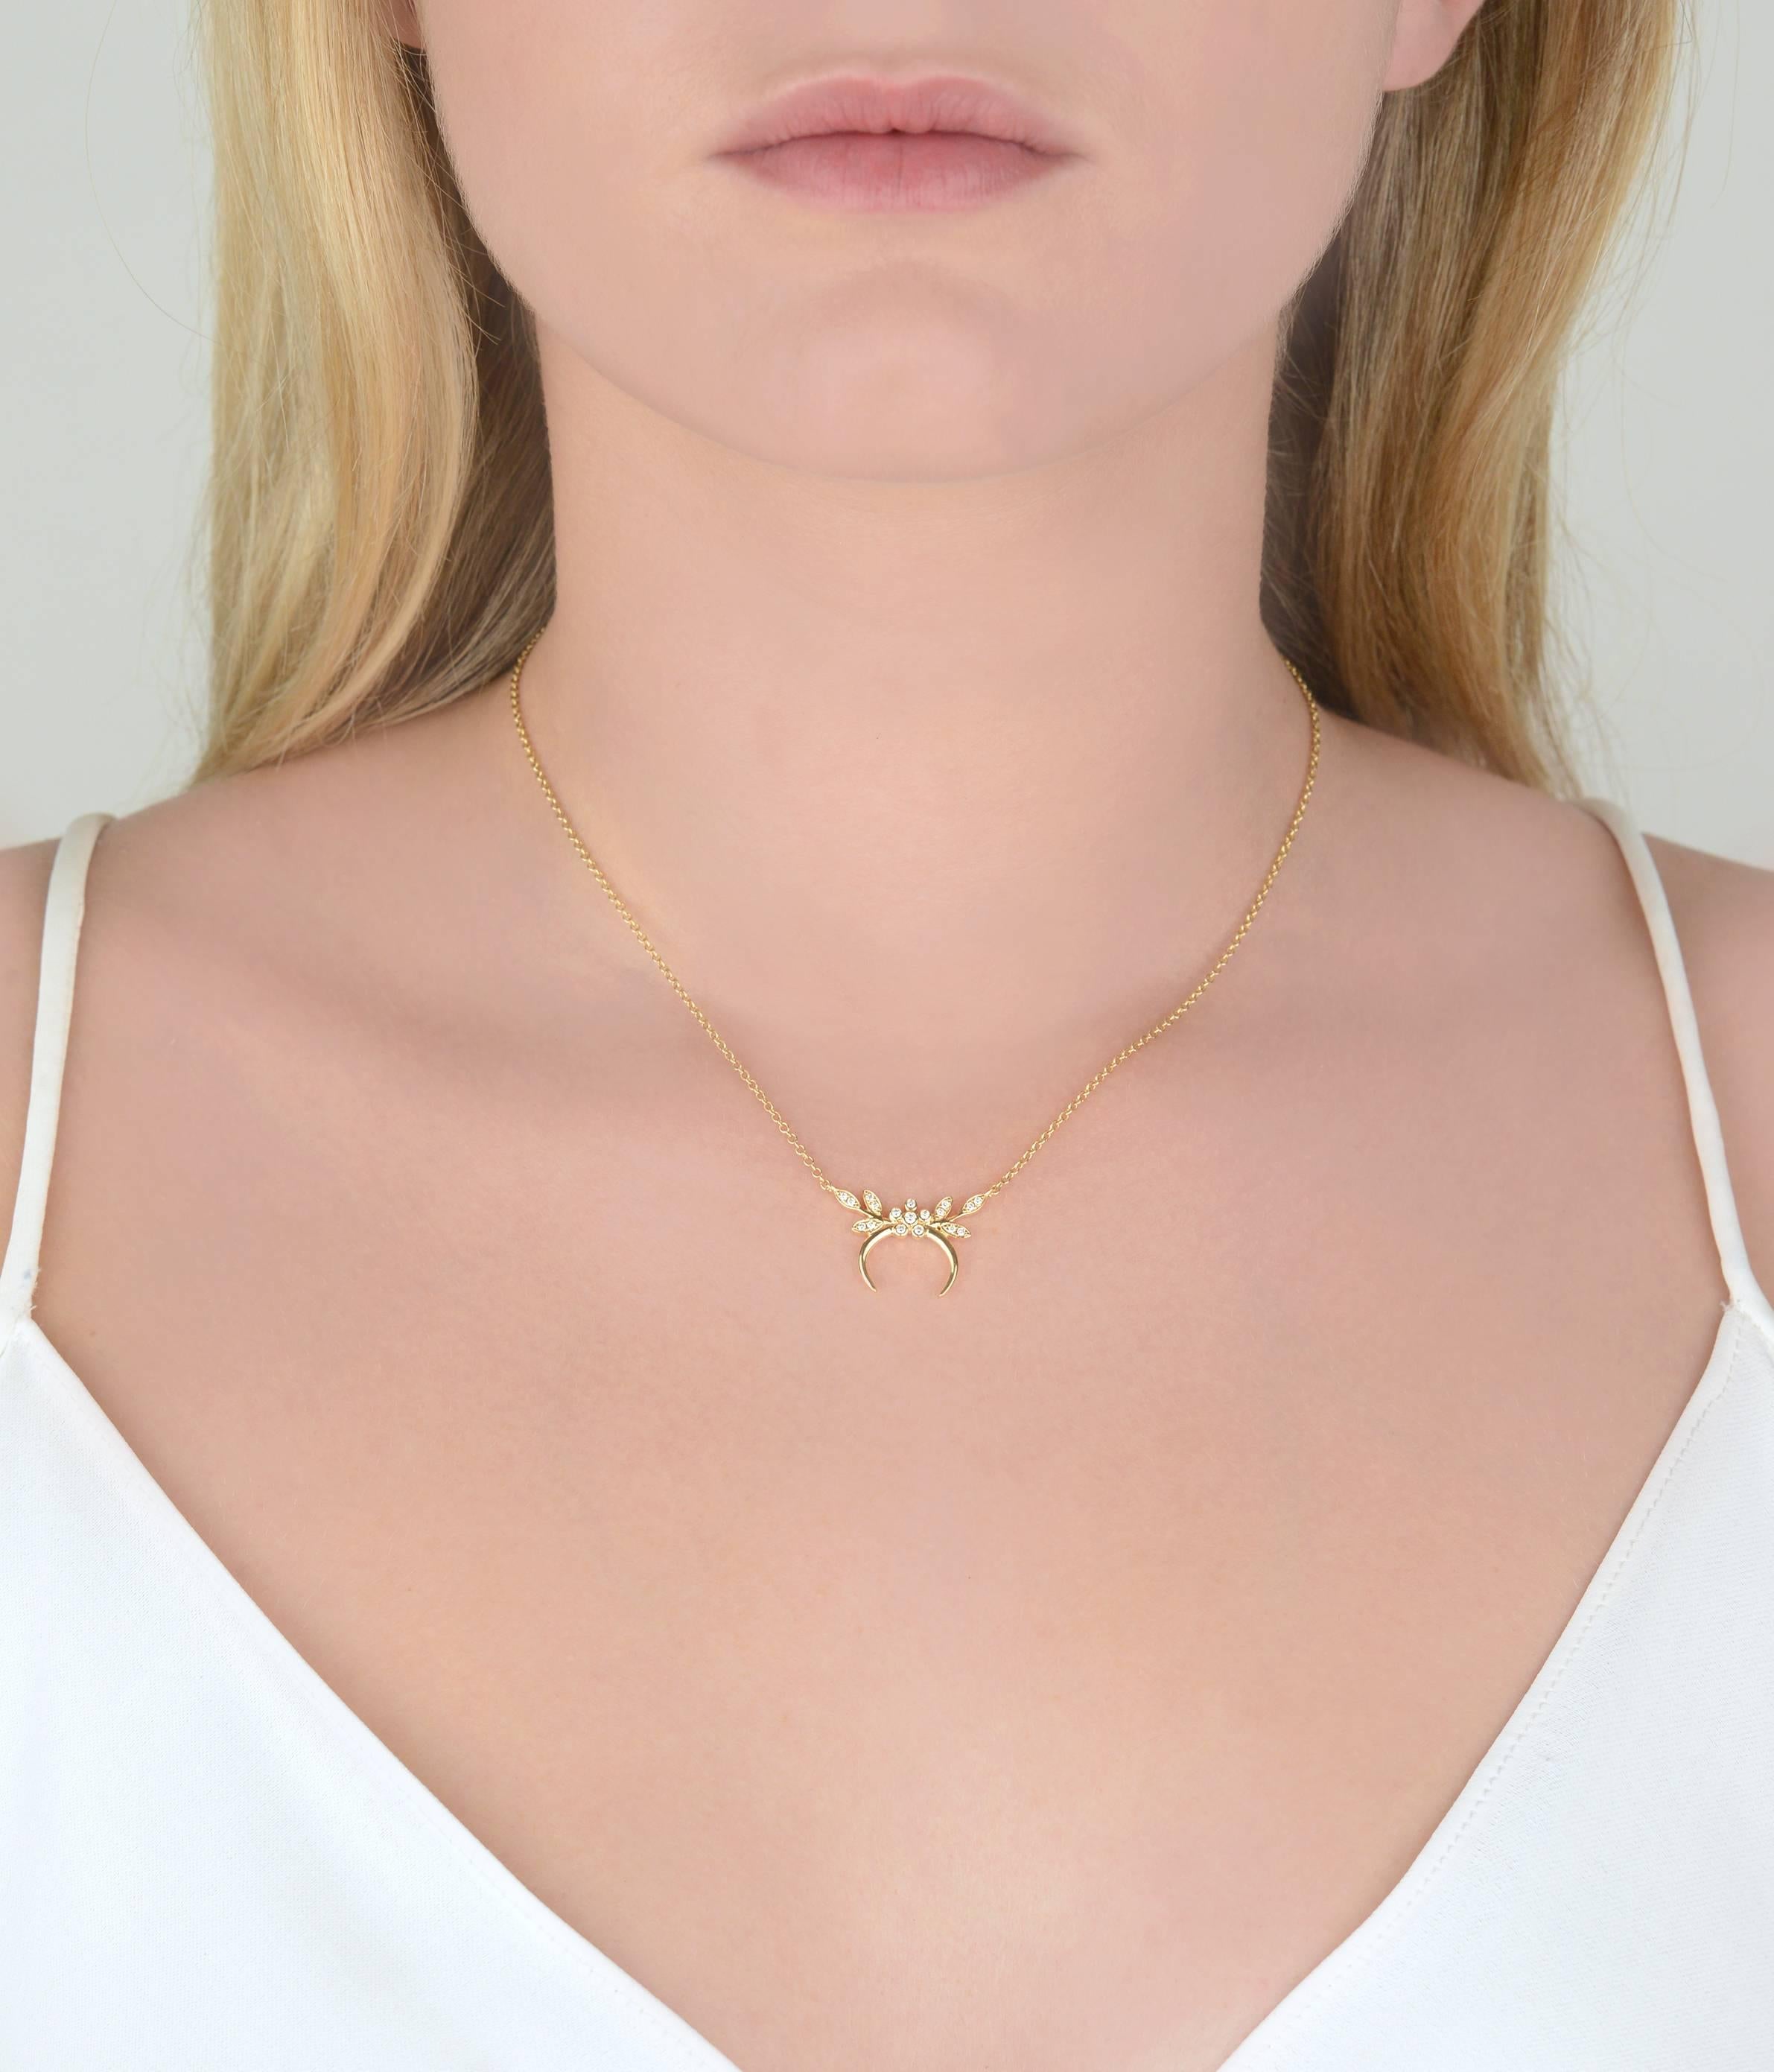 Necklace in 18K yellow Gold 4,3 grammes
Diamonds 0,11 carats 
3 holes to fix the lenght
